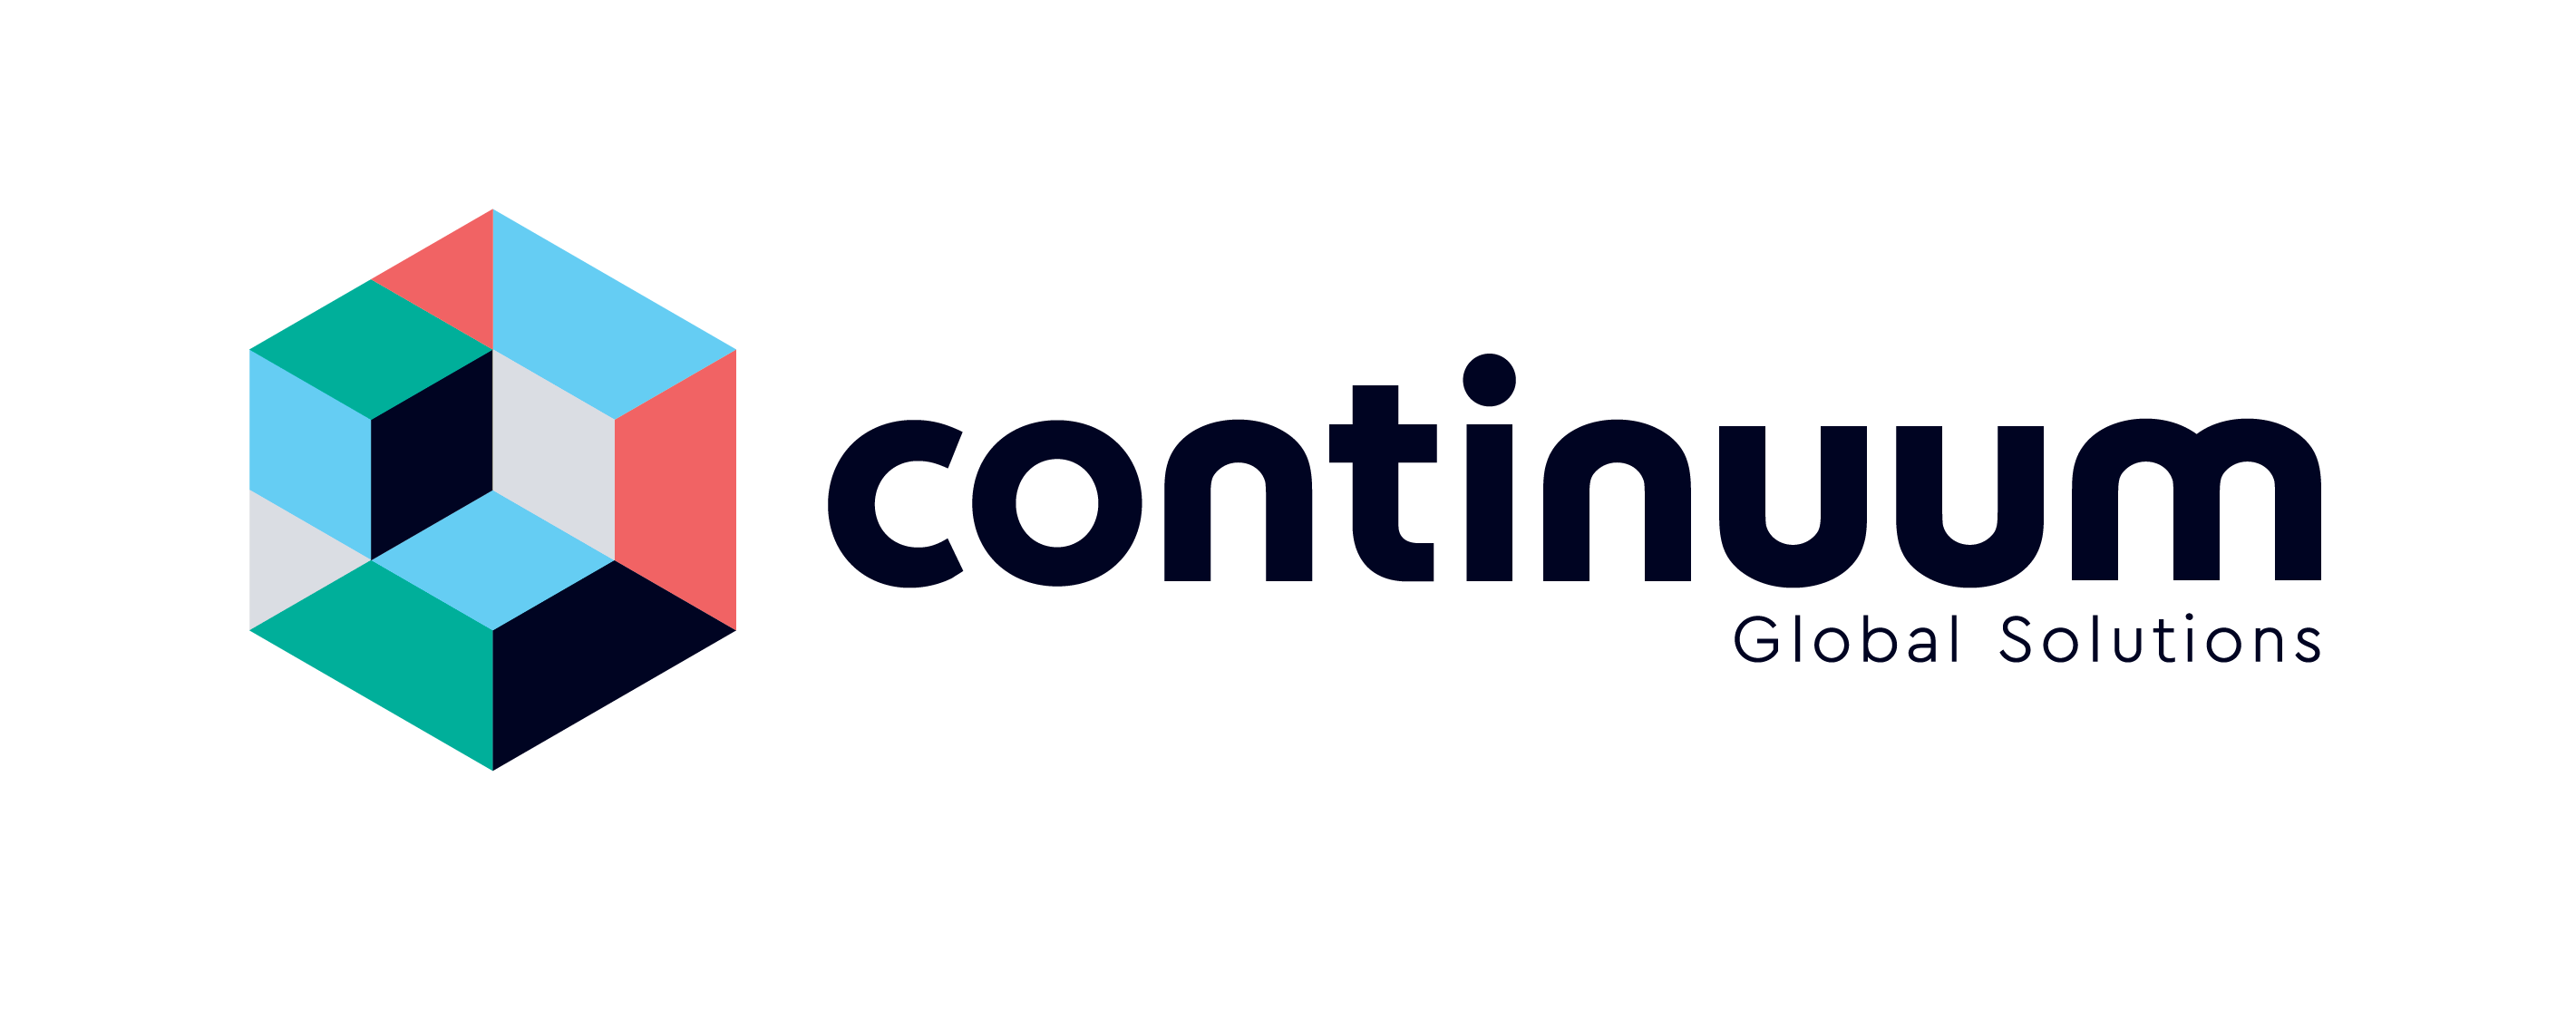 Continuum Global Solutions LLC, Monday, January 6, 2020, Press release picture